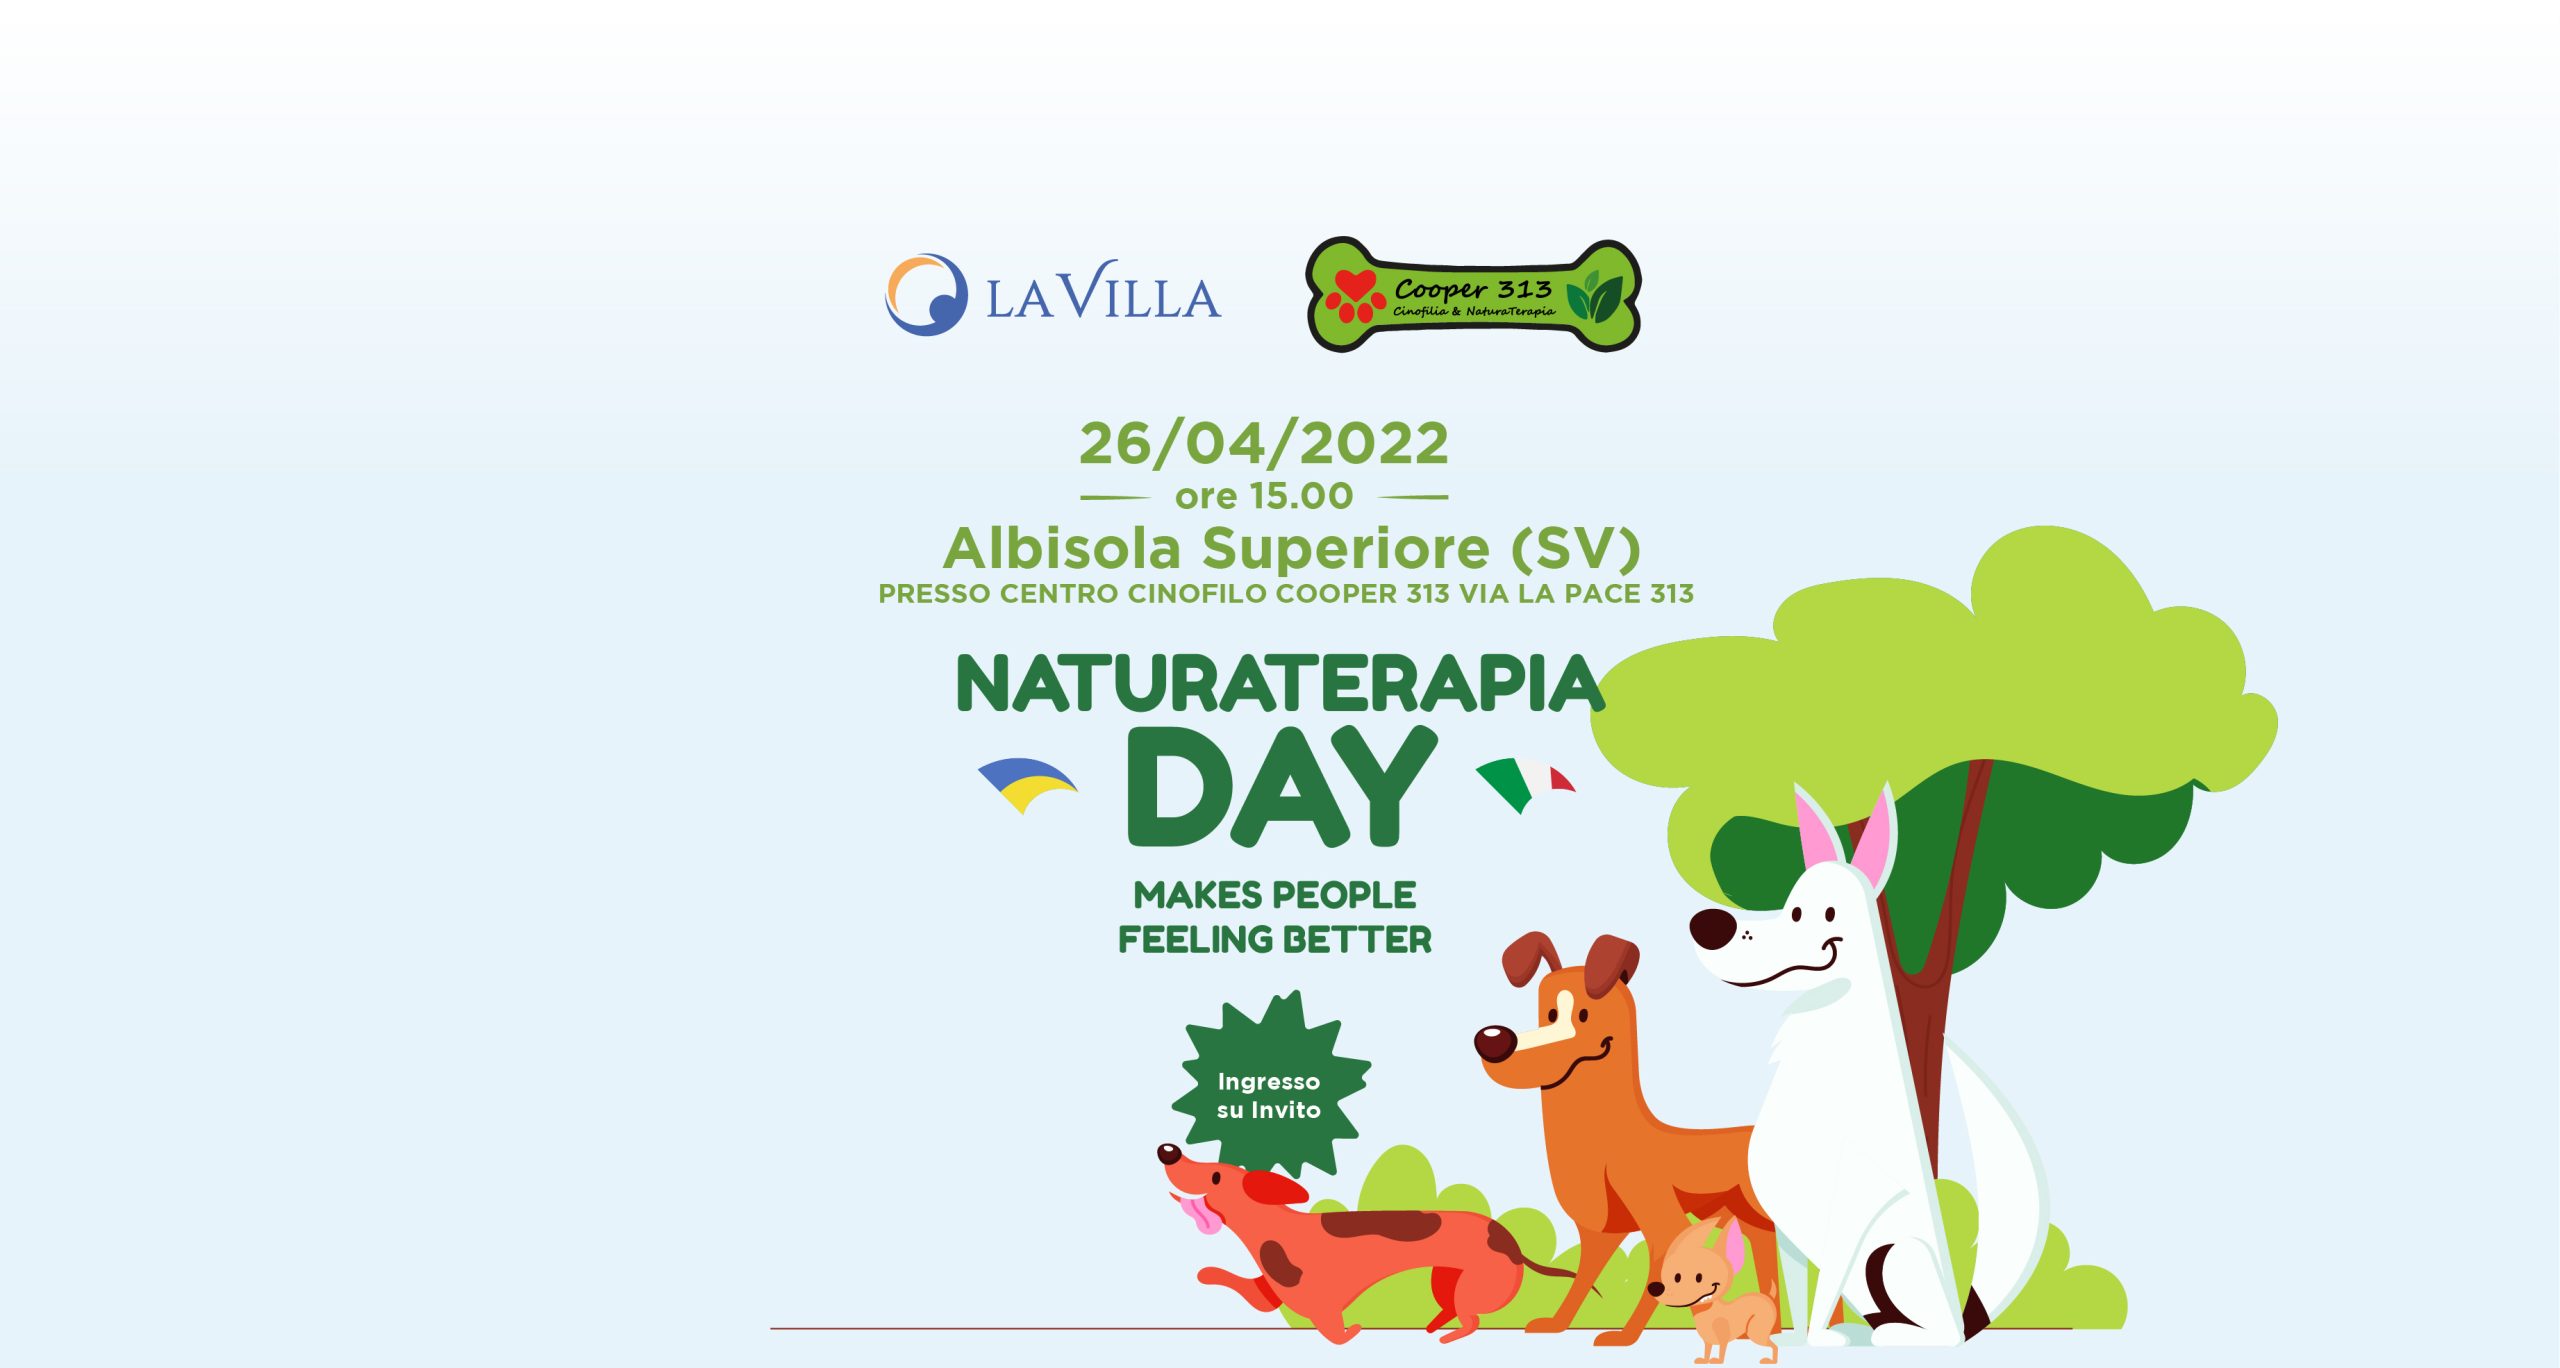 NaturaTerapia Day: makes people feeling better!